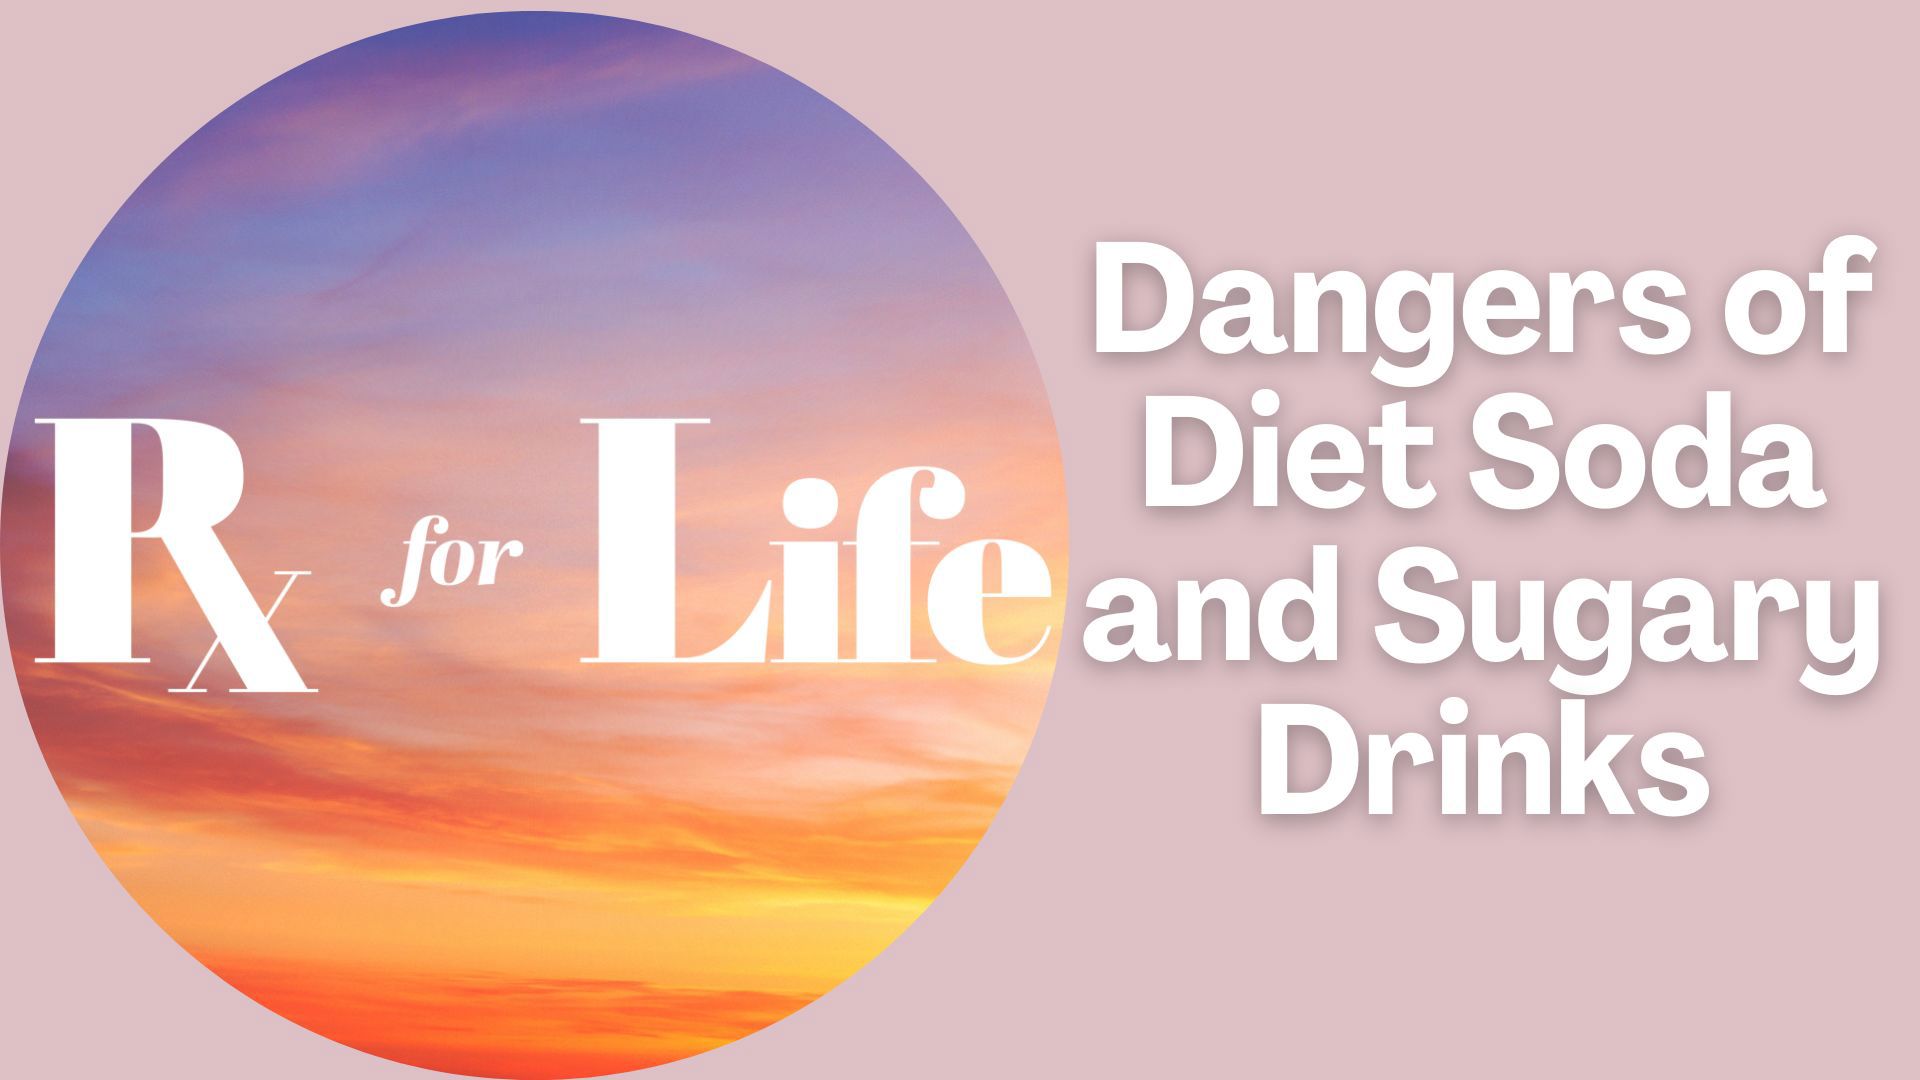 Monica Robins sits down with a registered dietitian to learn about the dangers of diet soda and sugary drinks. How they can impact your heart and your health.